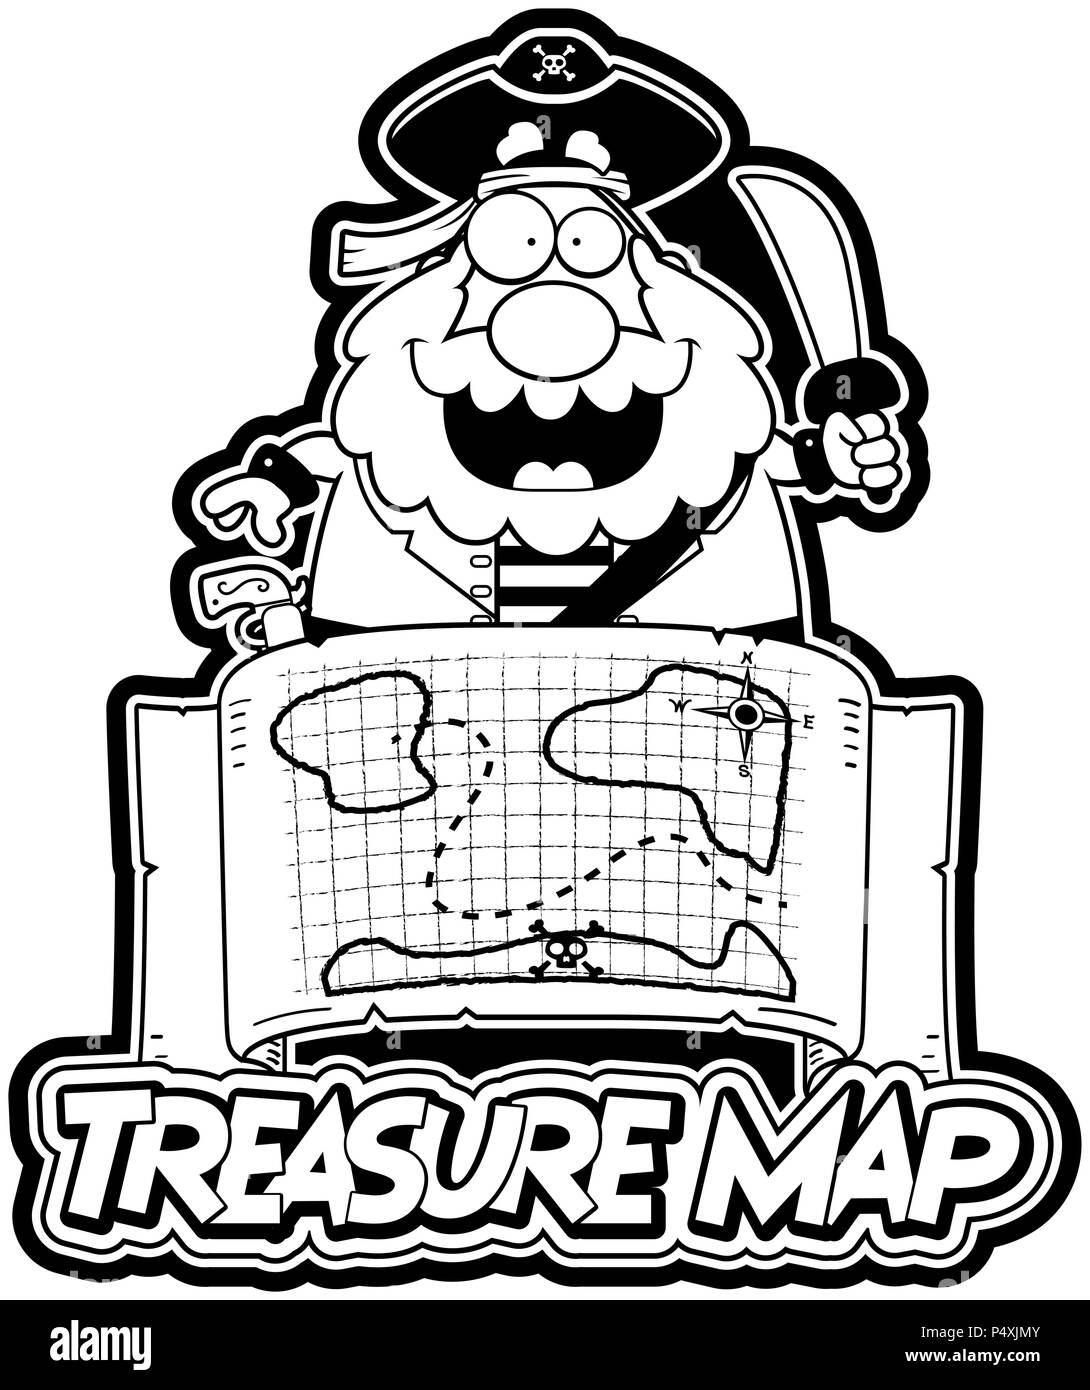 A cartoon illustration of a pirate with a treasure map and treasure map text. Stock Vector